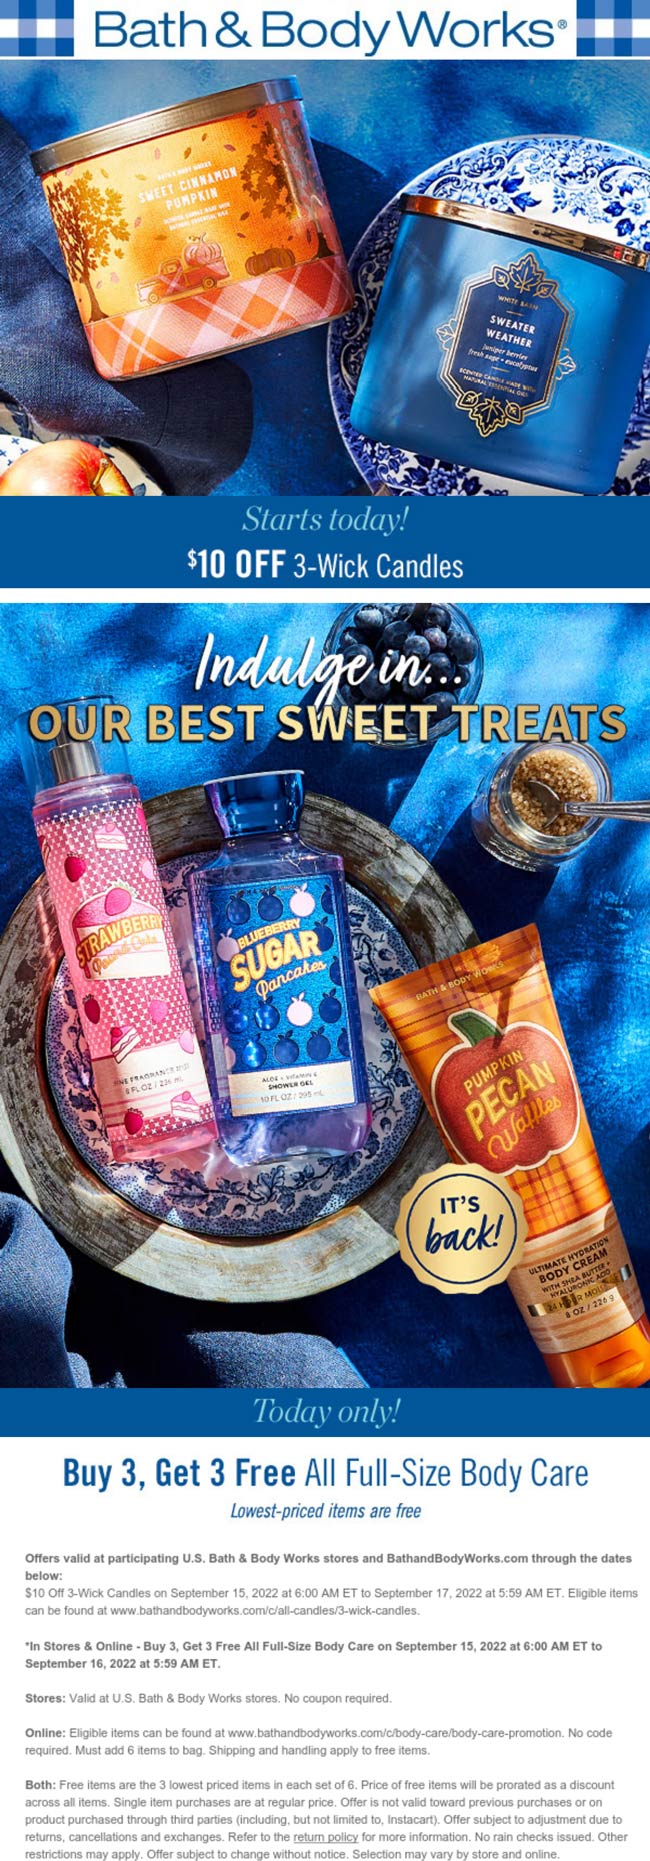 Bath & Body Works stores Coupon  6-for-3 on body care & more today at Bath & Body Works, ditto online #bathbodyworks 